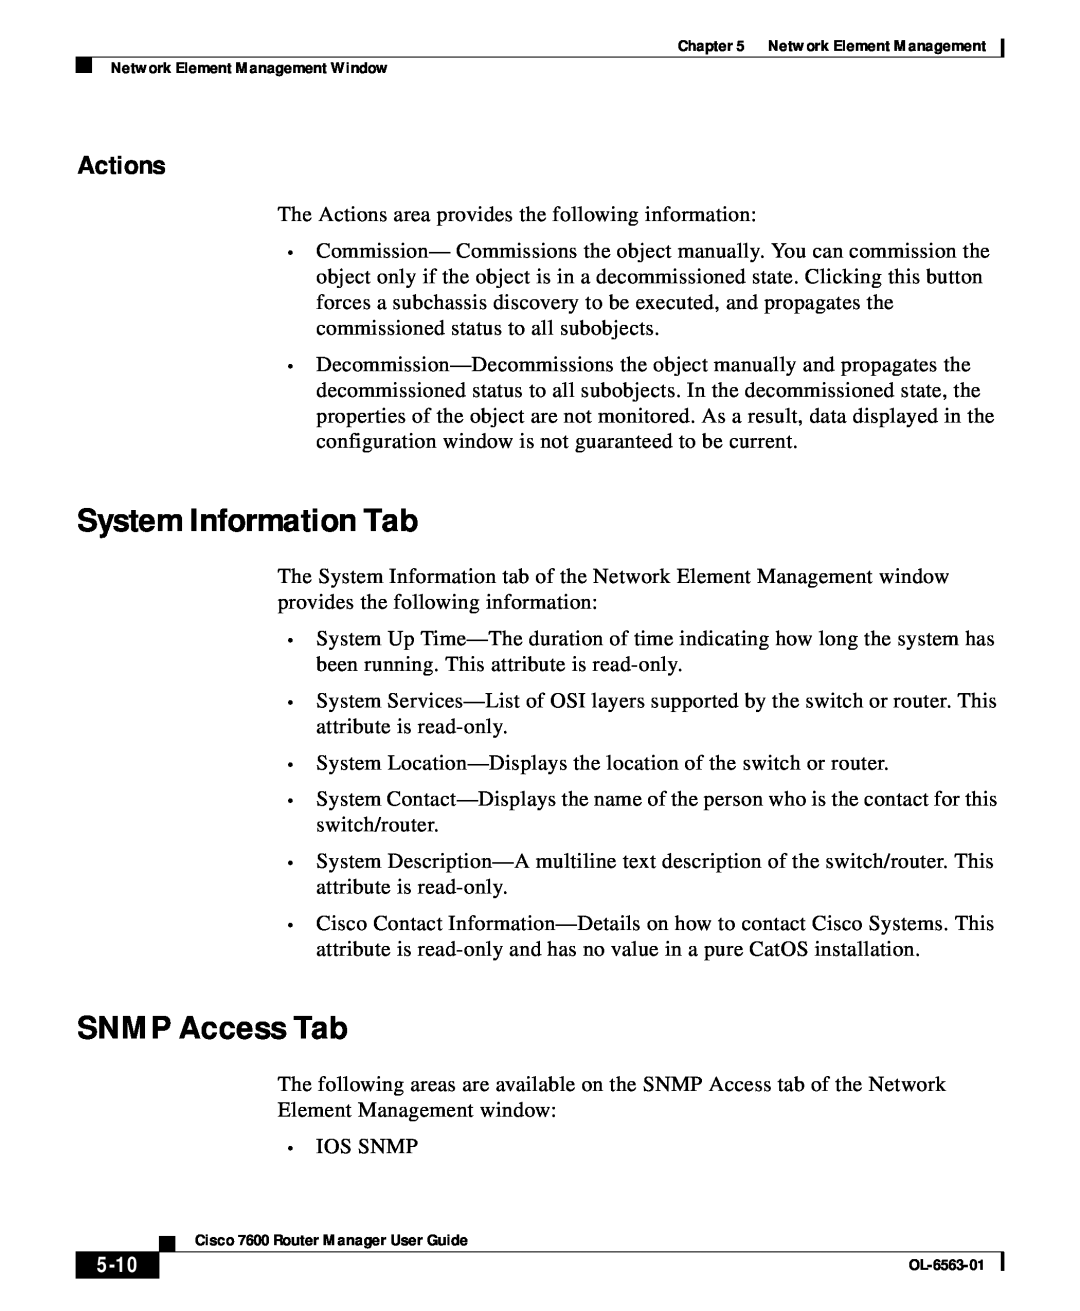 Cisco Systems OL-6563-01 manual System Information Tab, SNMP Access Tab, Actions, 5-10 